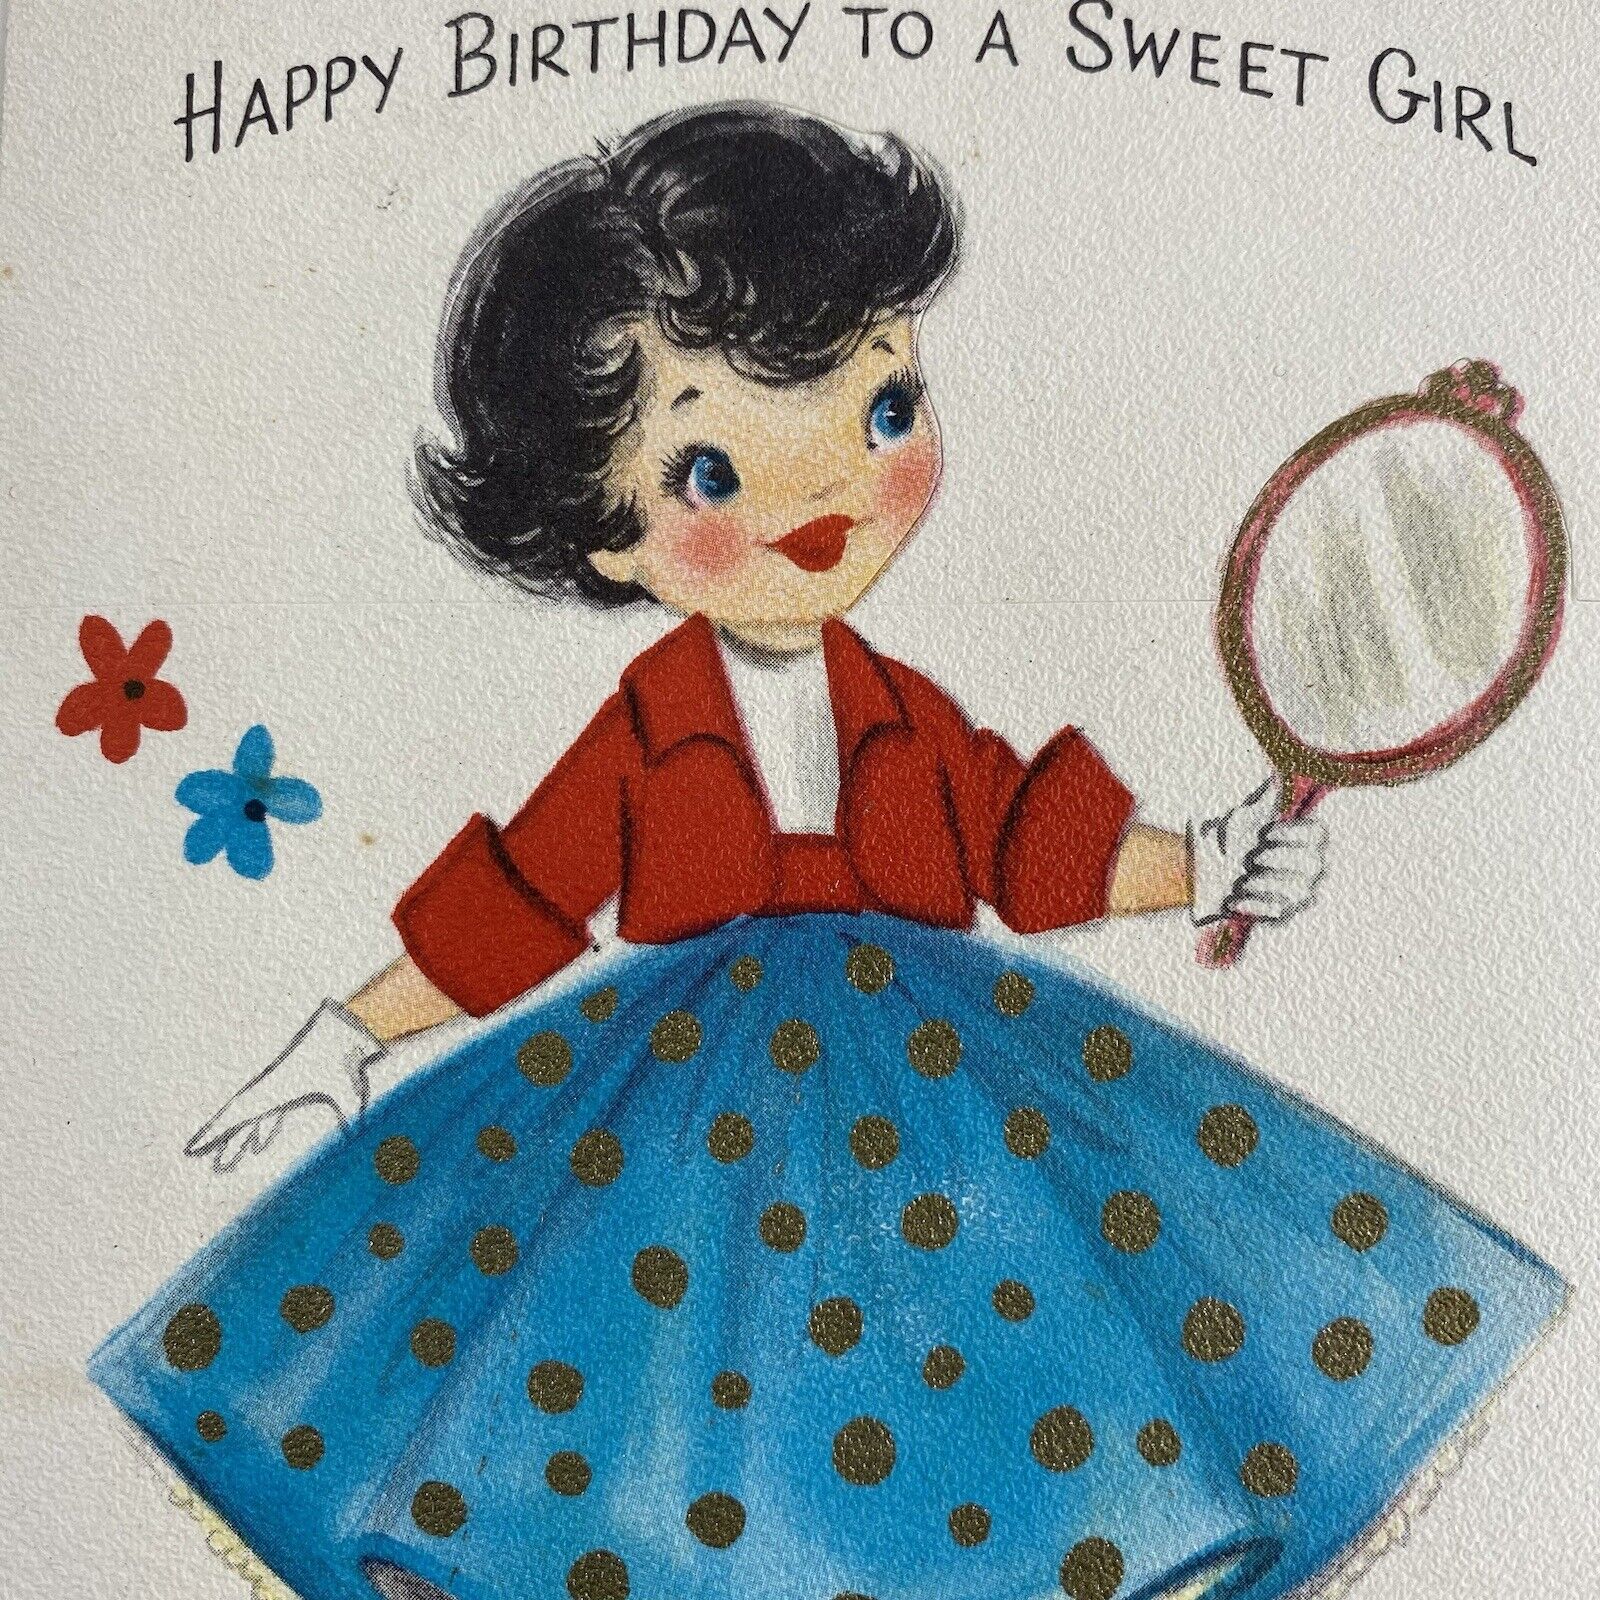 Vintage Mid Century Greeting Card Birthday Cute Girl Chose Her Hat Punch Out Hat